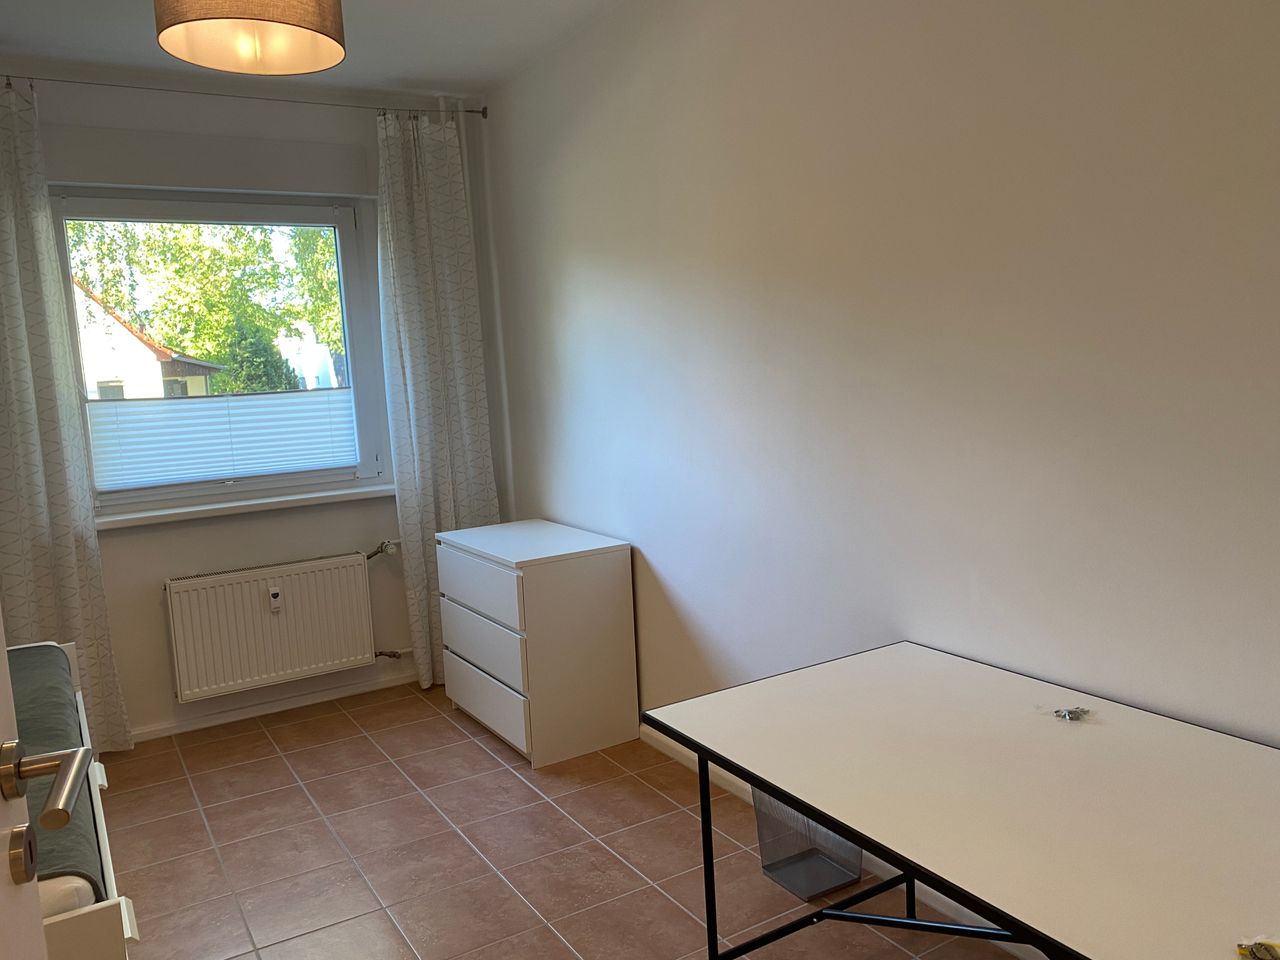 Chic and quiet apartment in Zehlendorf in the middle of greenery